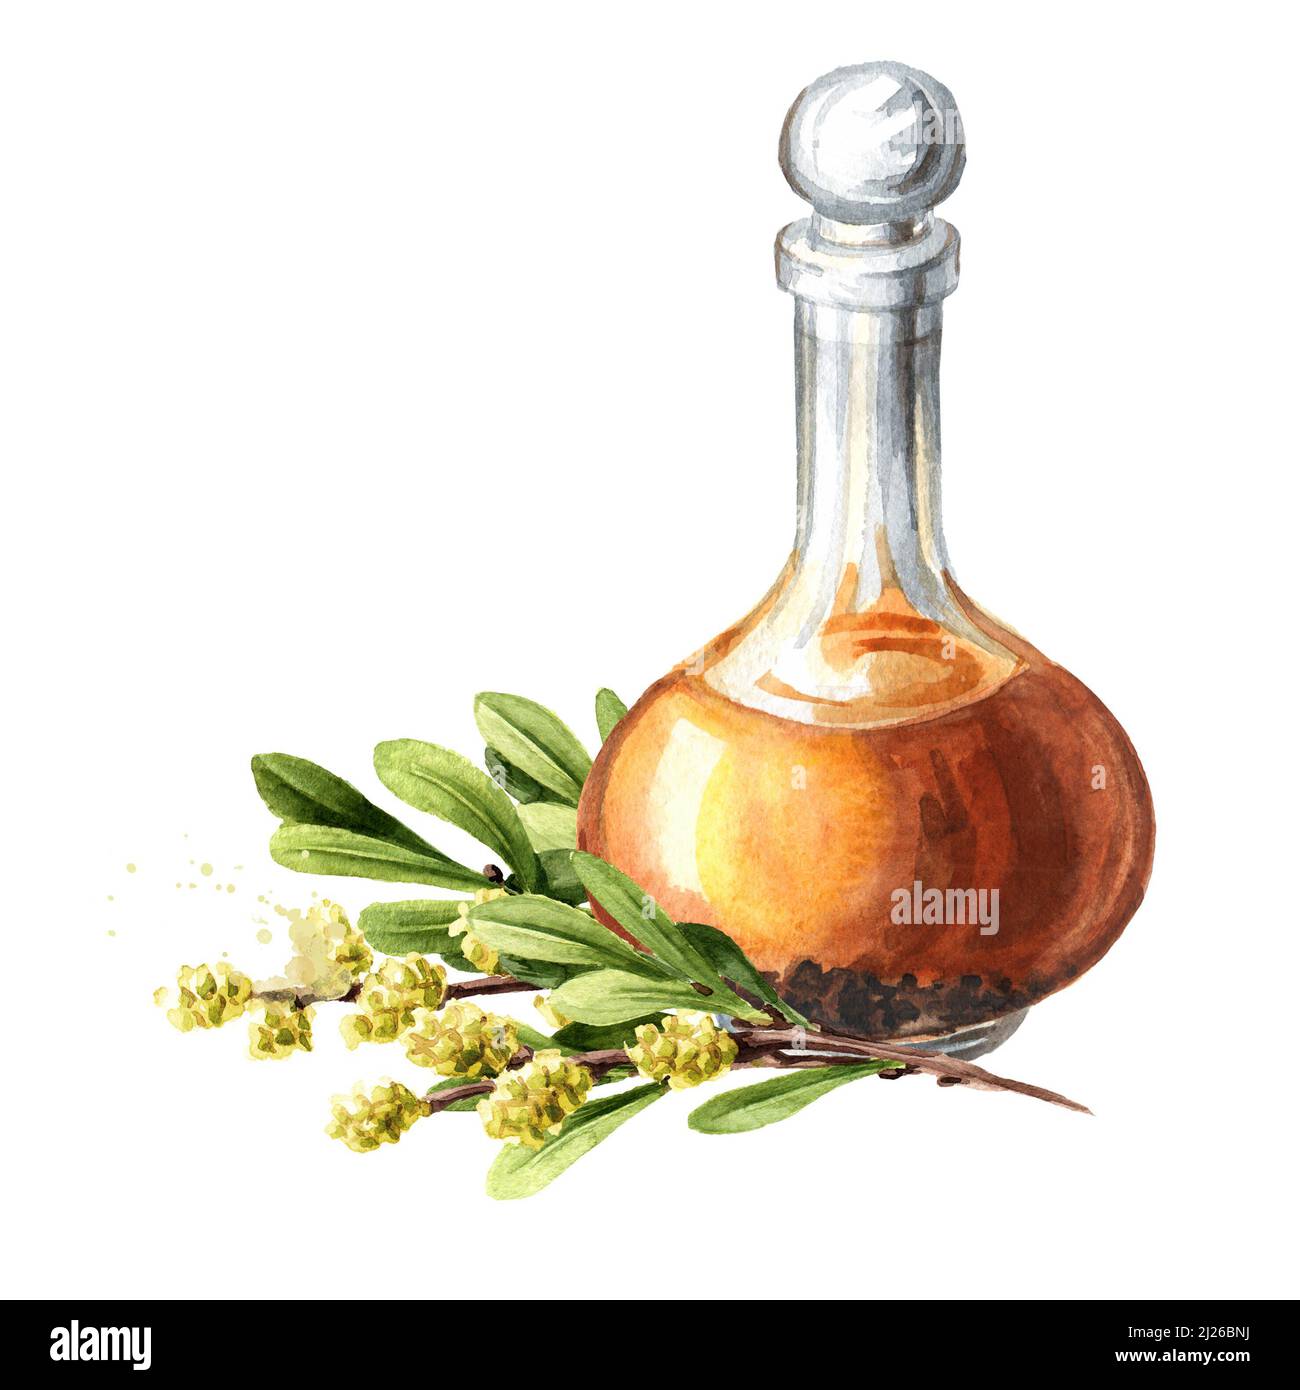 Bog myrtle homemade tincture, medicinal plant. Hand drawn watercolor illustration isolated on white background Stock Photo